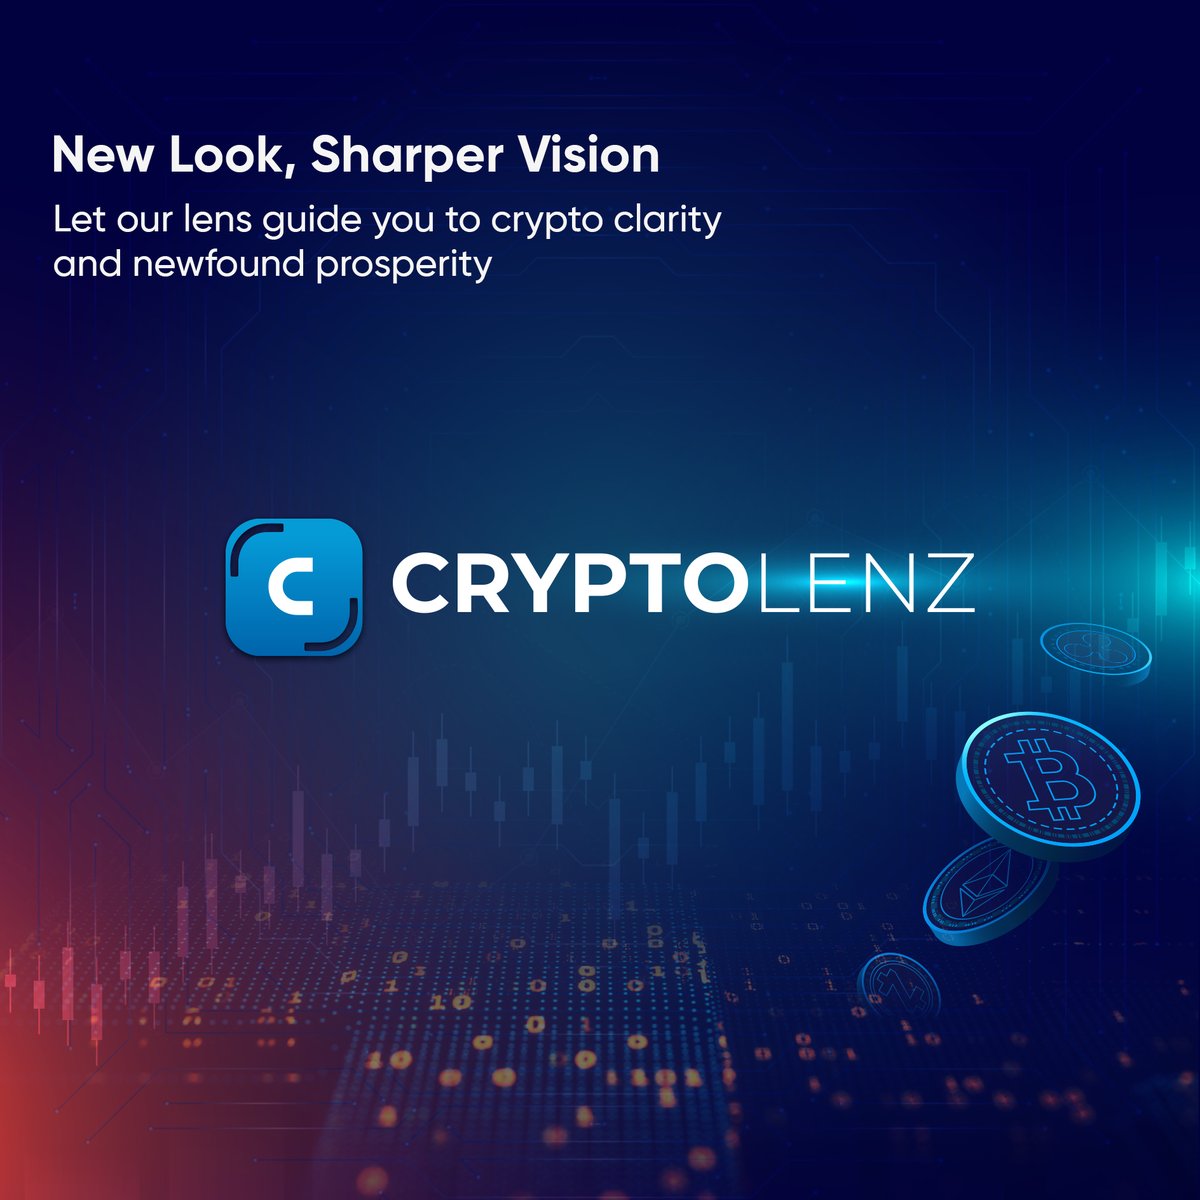 #Cryptolenz would like to welcome you to the brave new era of #Crypto! We've gotten ourselves a sharp new lens to bring you brighter insights on all things crypto! Join us today and unearth golden opportunities that can put you on the path to prosperity. #ICO #IDO #Airdrops